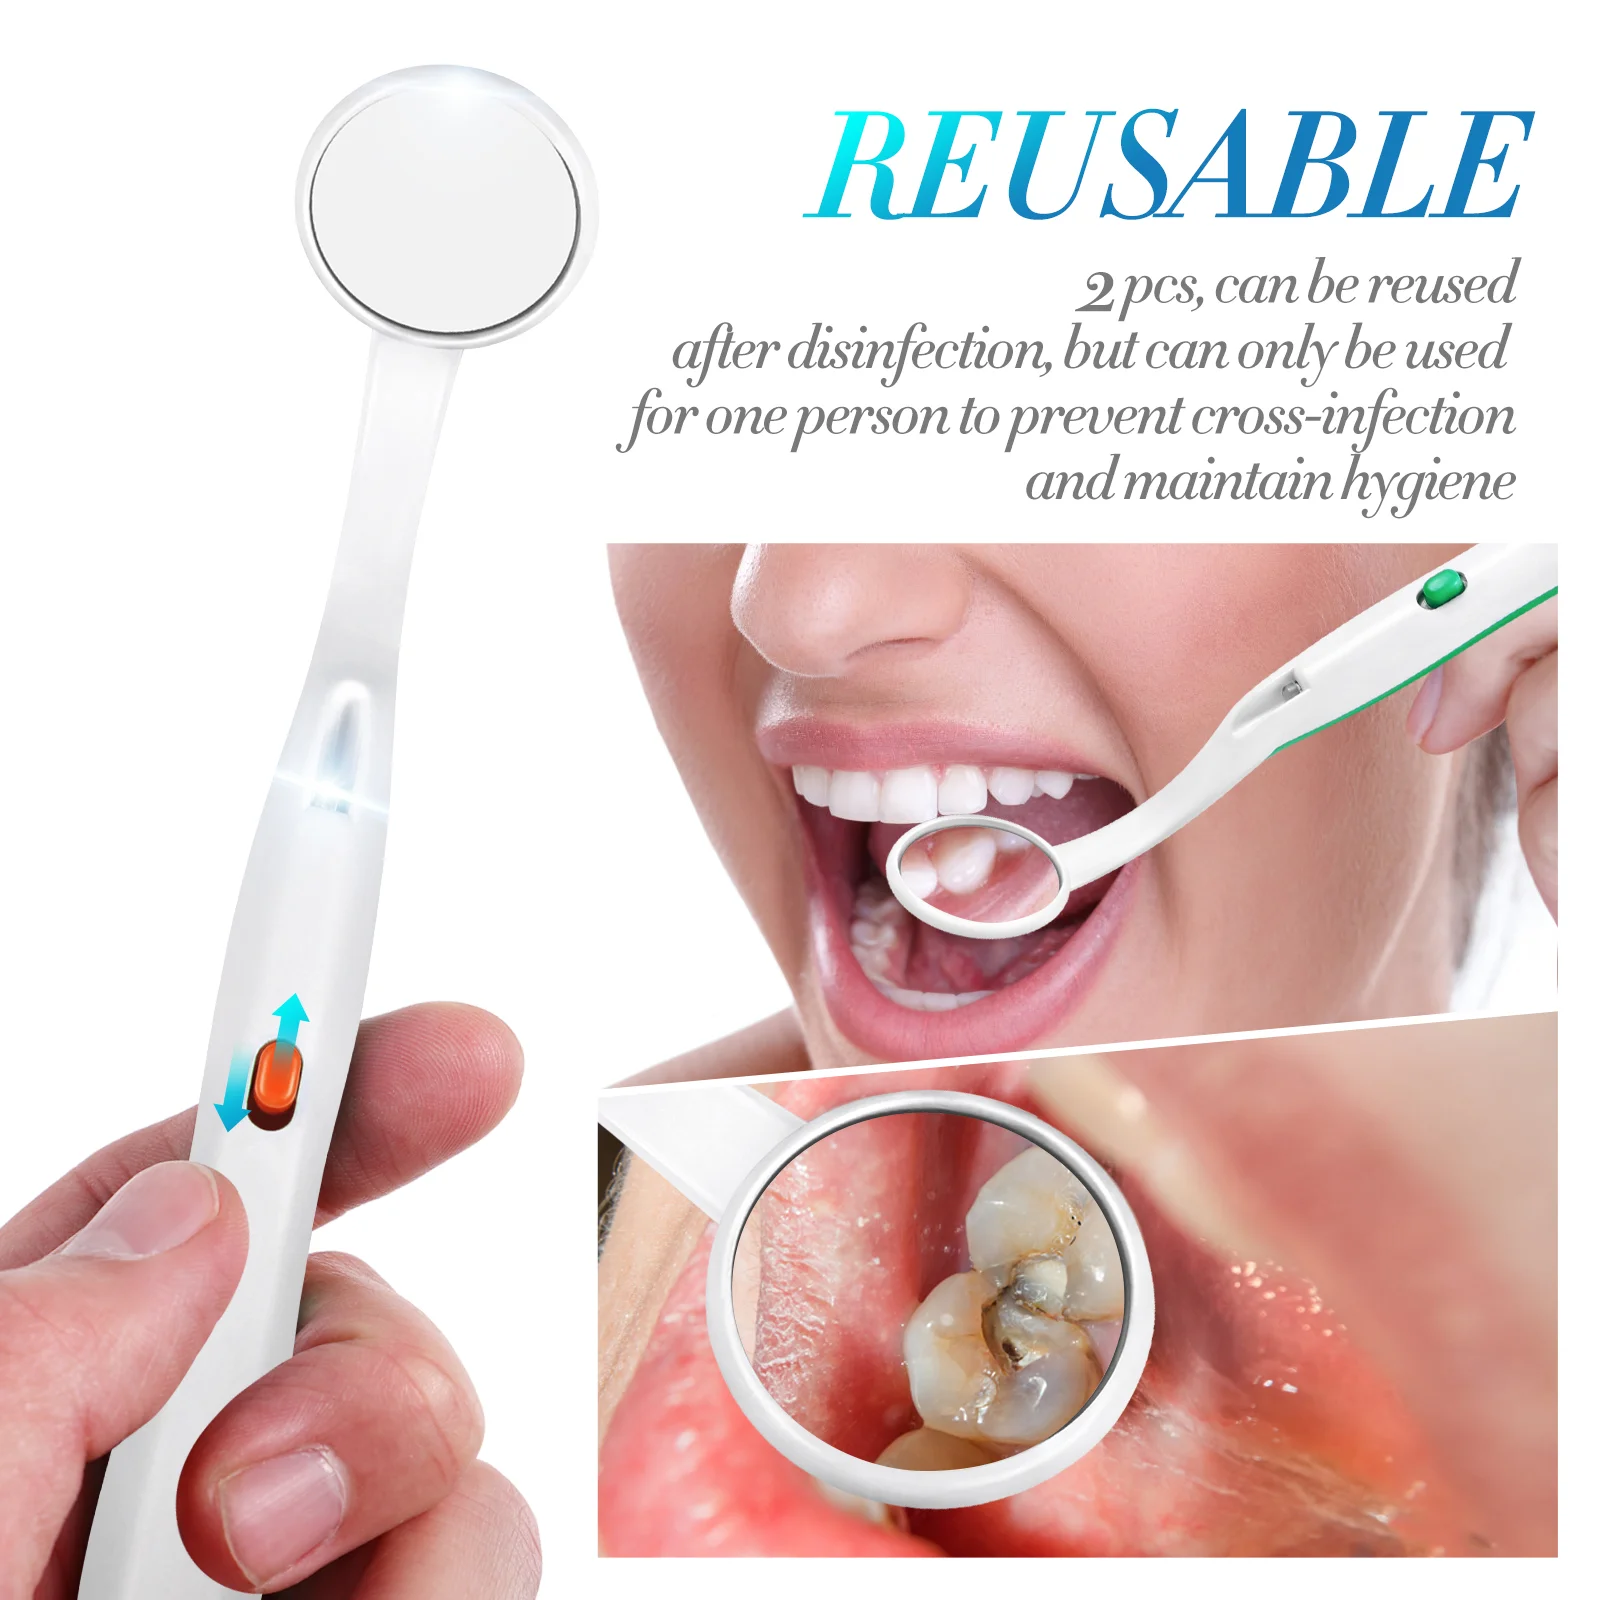 den tal equipment den tal air polisher den tal teeth cleaning air flow prophy jet handpiece dentist airflow polisher Mirror Mouth Inspectionoral Teeth Toolangle Diagnostic Fog Light Handle Led Home Curve Lighted Use Cleaning Anti Dentist Care